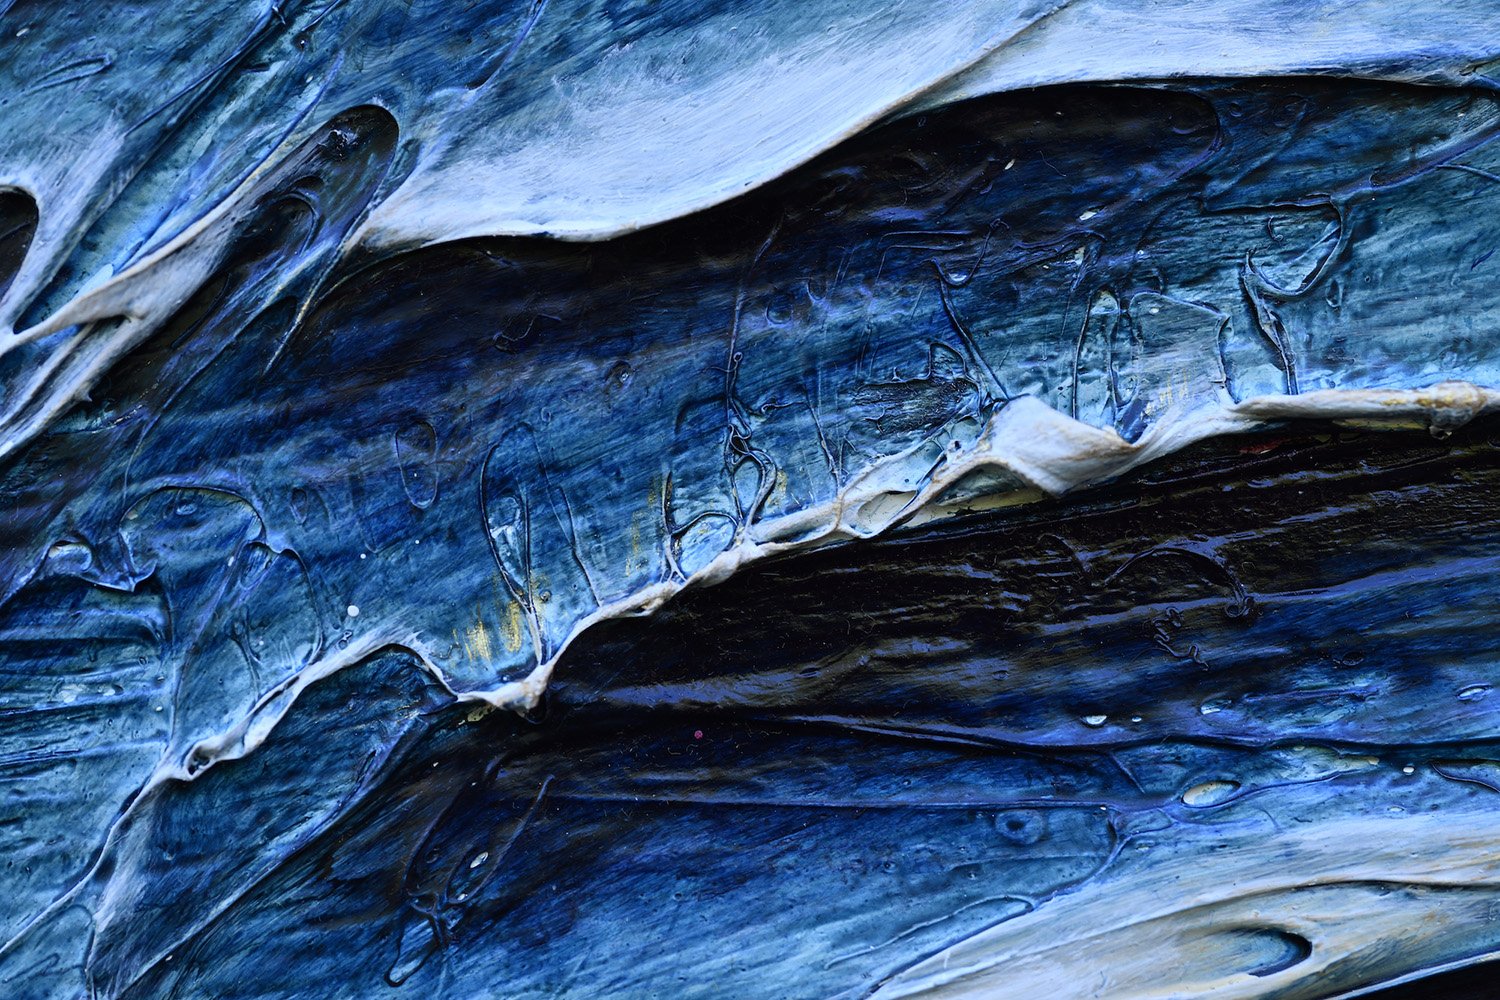   Alchemy of Wisdom  (Detail from  Homage to Blue ), 2015-2016, mixed media, 35" x 96" 